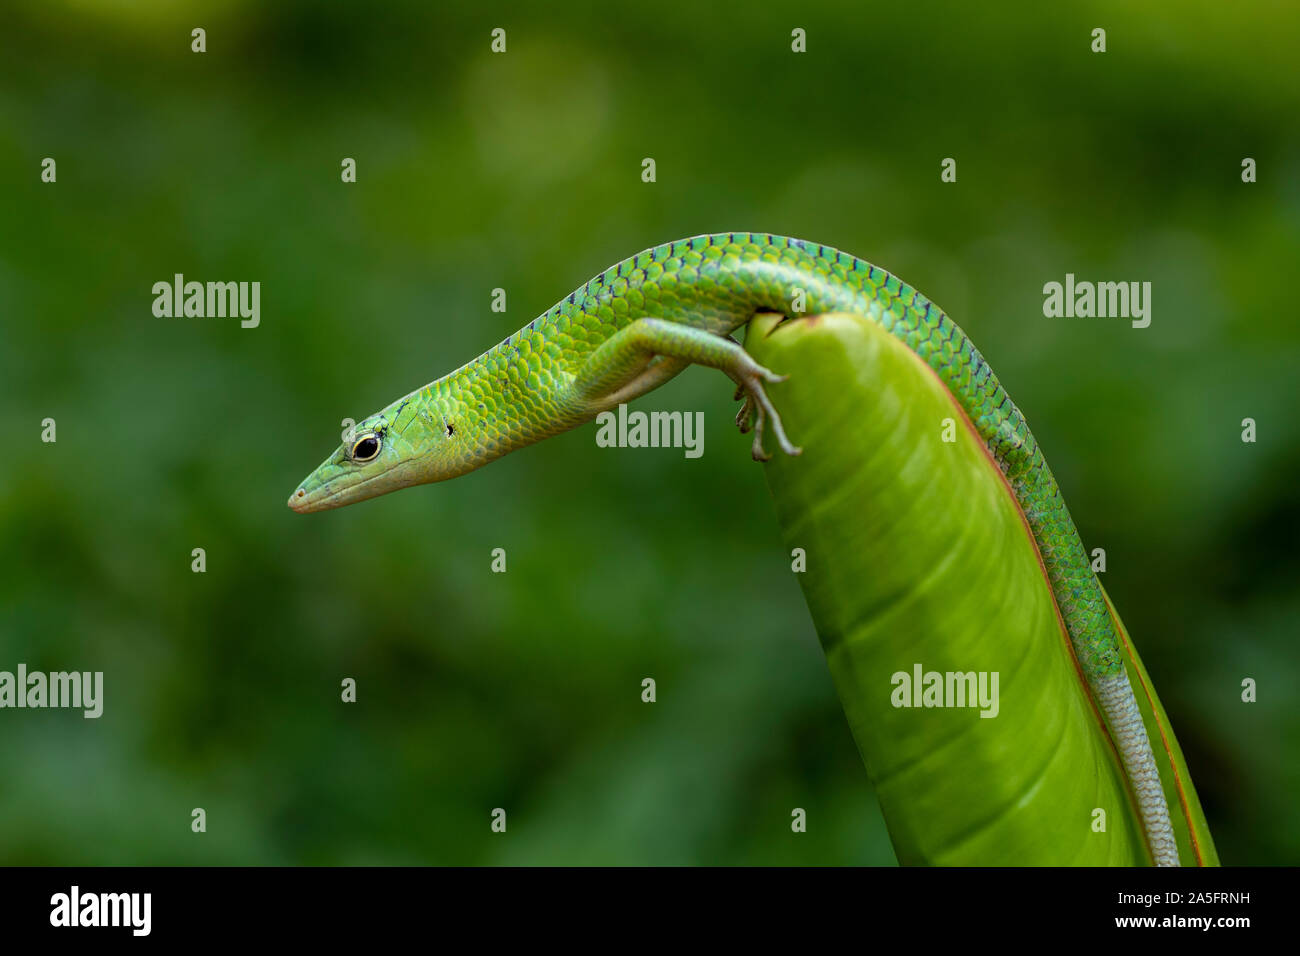 Green skink lizard on a plant, Indonesia Stock Photo